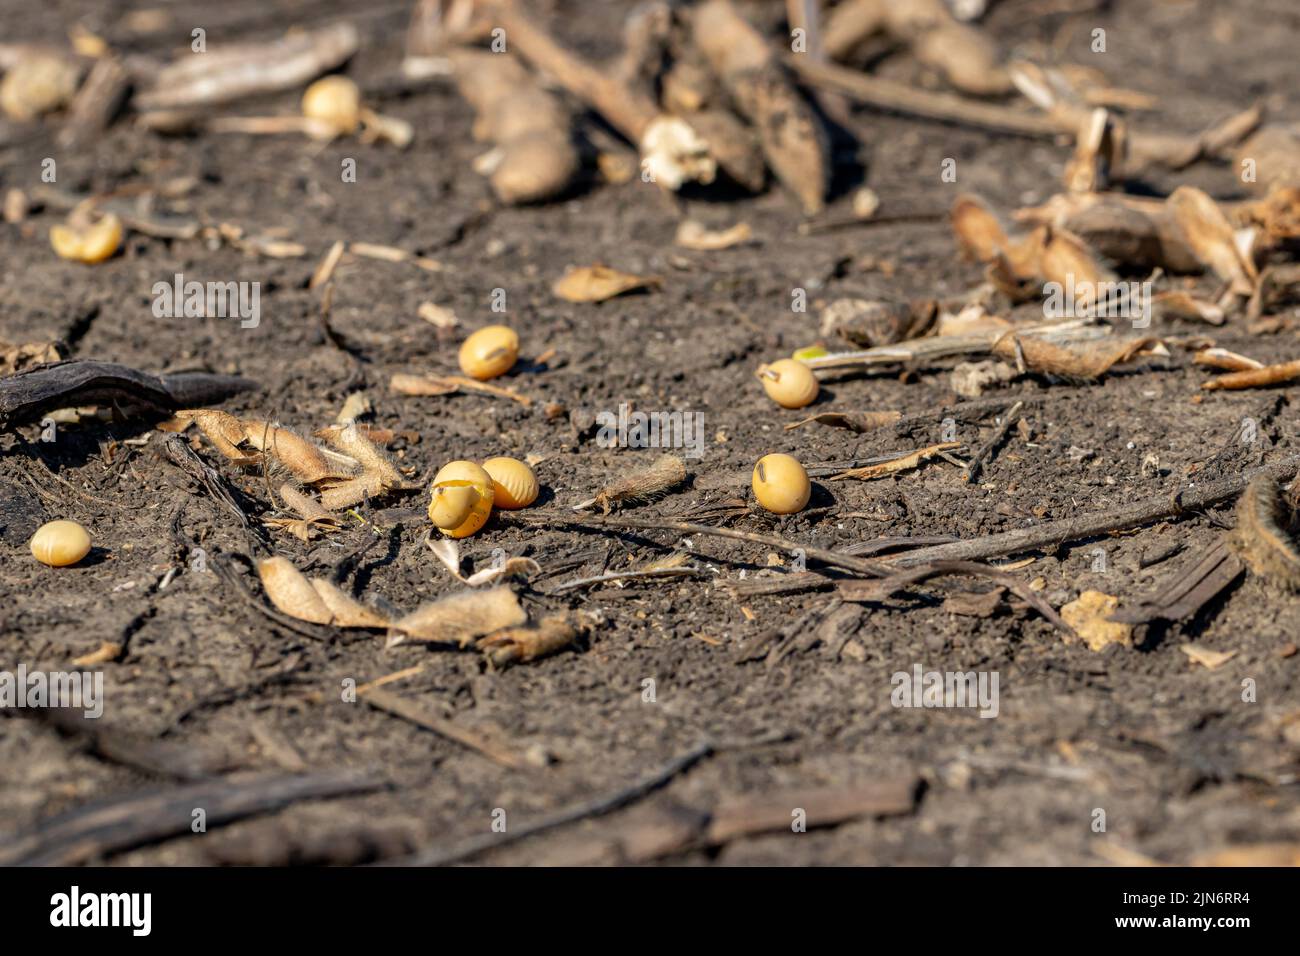 Soybeans dropped in harvested field. Soybean seed loss, yield and farming concept Stock Photo